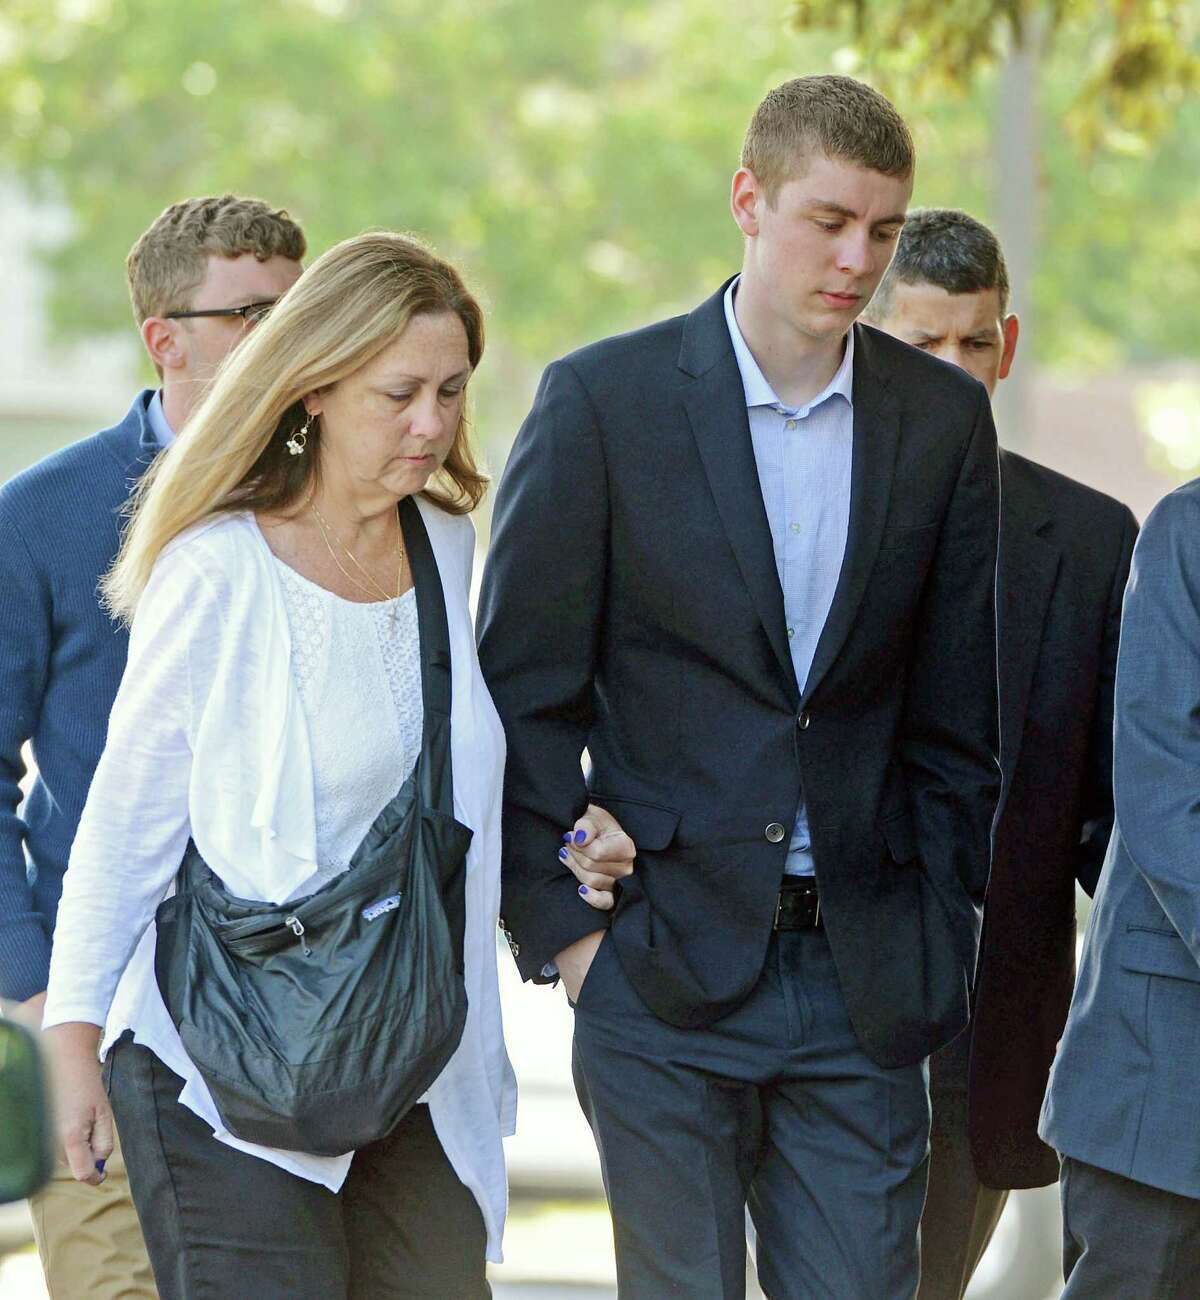 In this June 2, 2016 photo, Brock Turner, 20, right, makes his way into the Santa Clara Superior Courthouse in Palo Alto, Calif. The six-month jail term given to Turner, the former Stanford University swimmer who sexually assaulted an unconscious woman after both attended a fraternity party, is being decried as a token punishment. (Dan Honda/Bay Area News Group via AP) MAGS OUT NO SALES ORG XMIT: CAJOS101